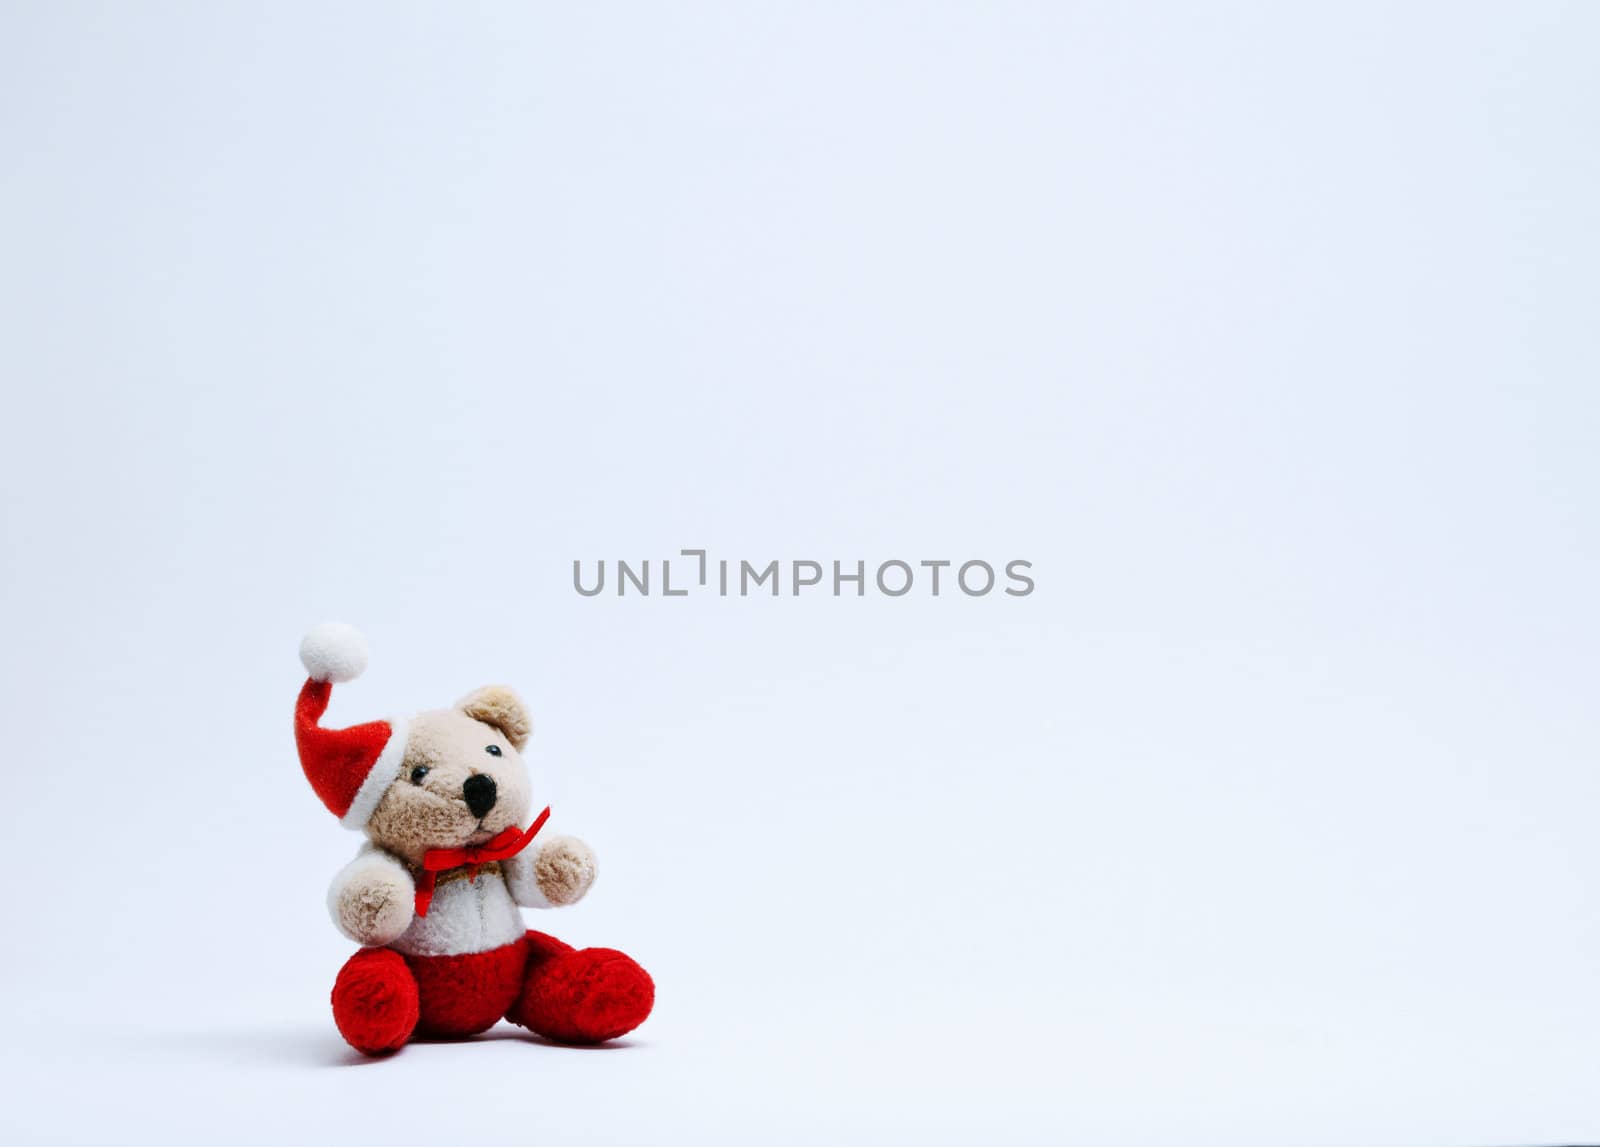 Christmas Teddy on a white background.